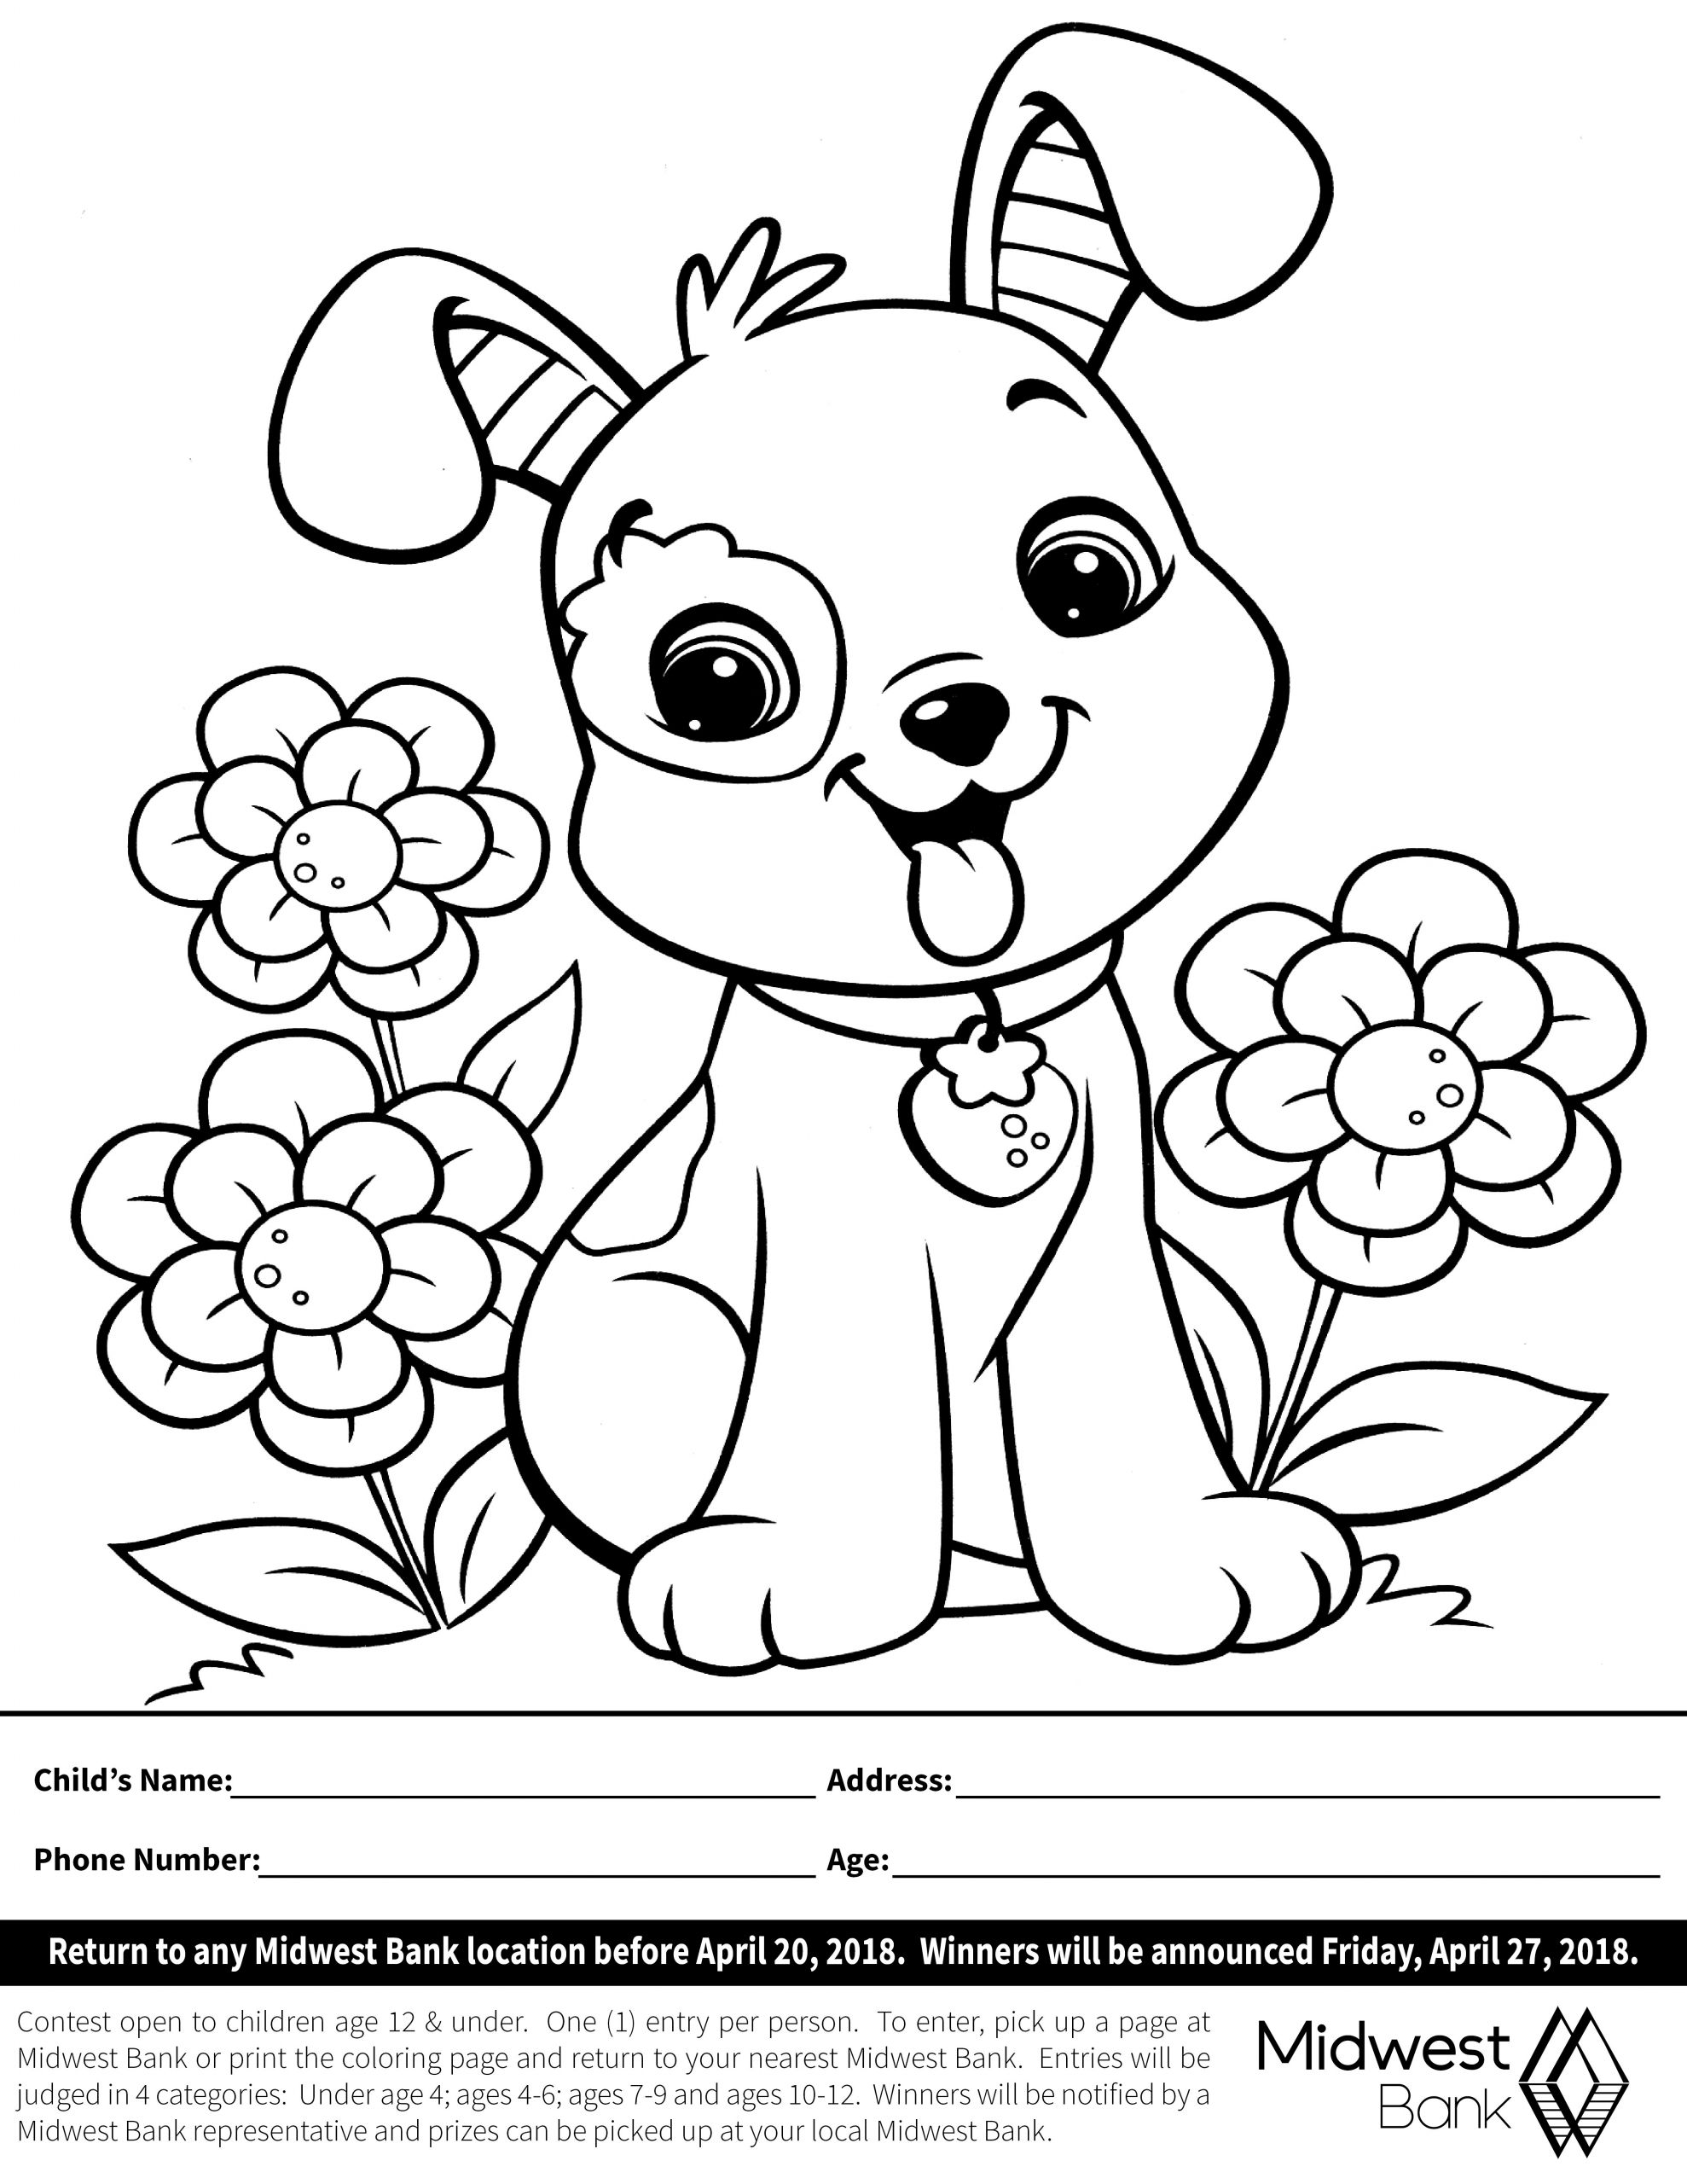 Coloring Contest Sign